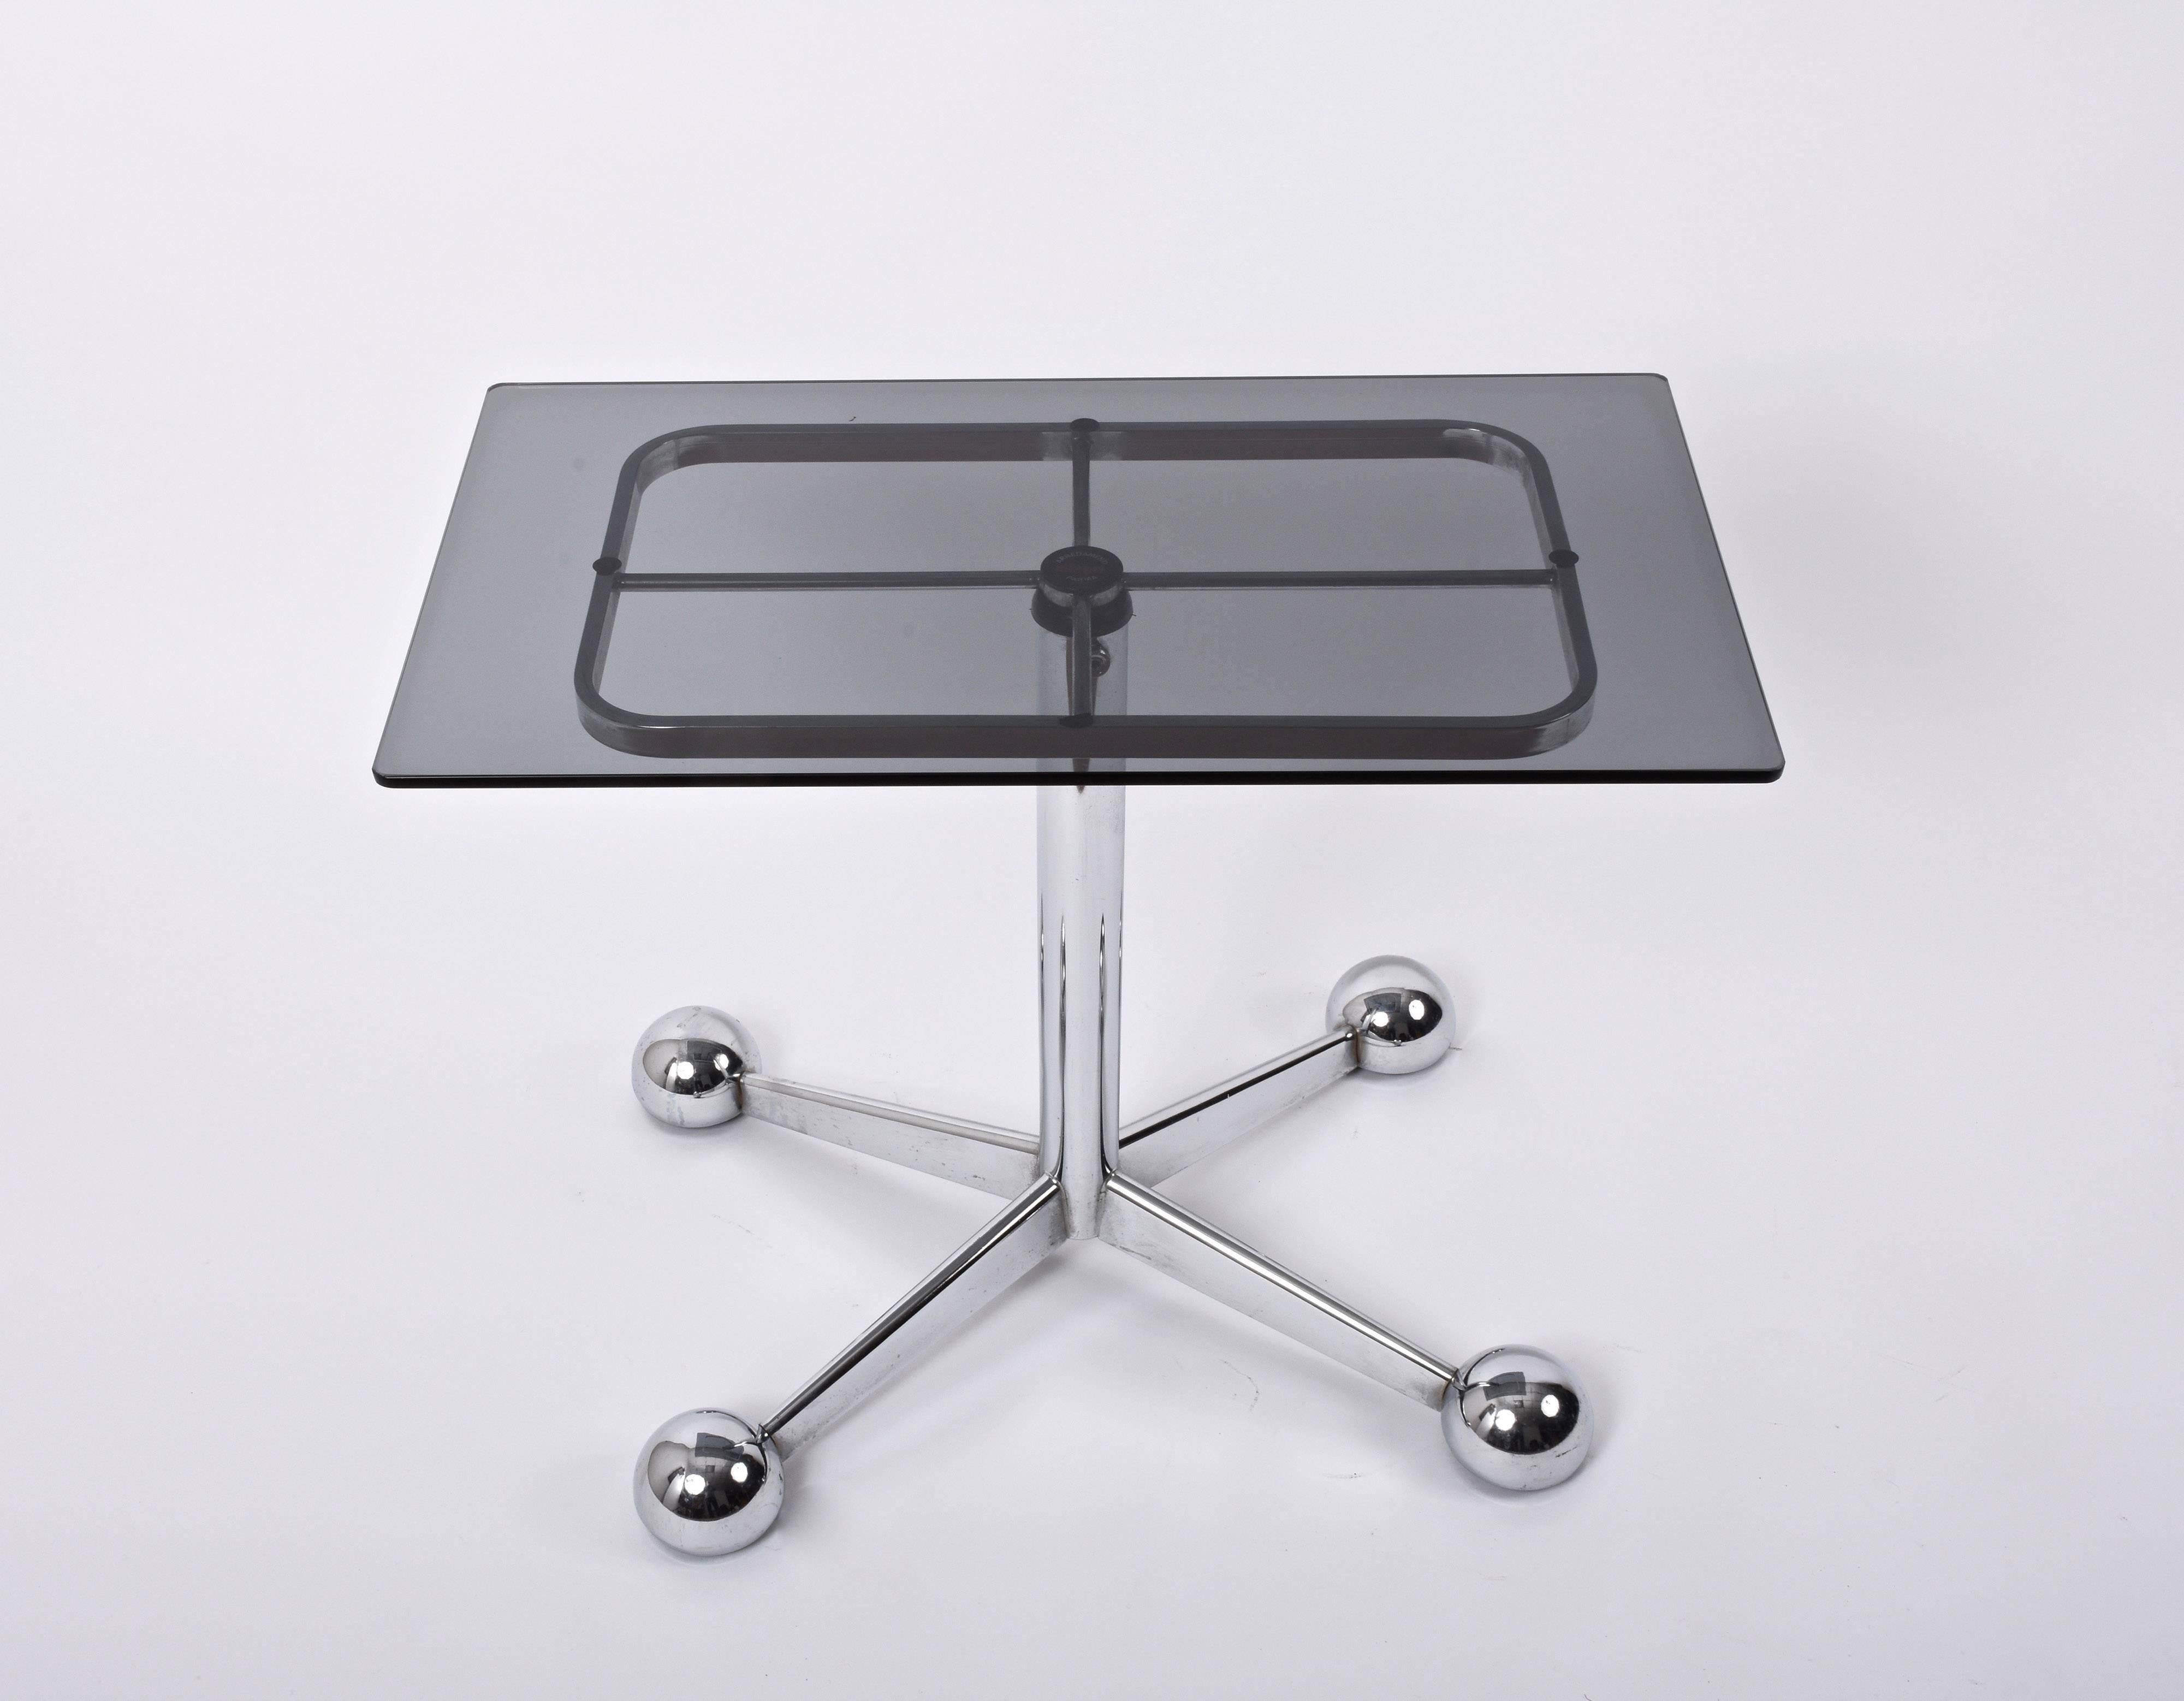 Magnificent adjustable bar trolley table produced by Allegri Arredamenti in Parma, Italy, during the 1970s.

It has a metal chrome base with smoked glass top. The rounded shaped wheel covers have a space-age influence.

Perfect for a midcentury